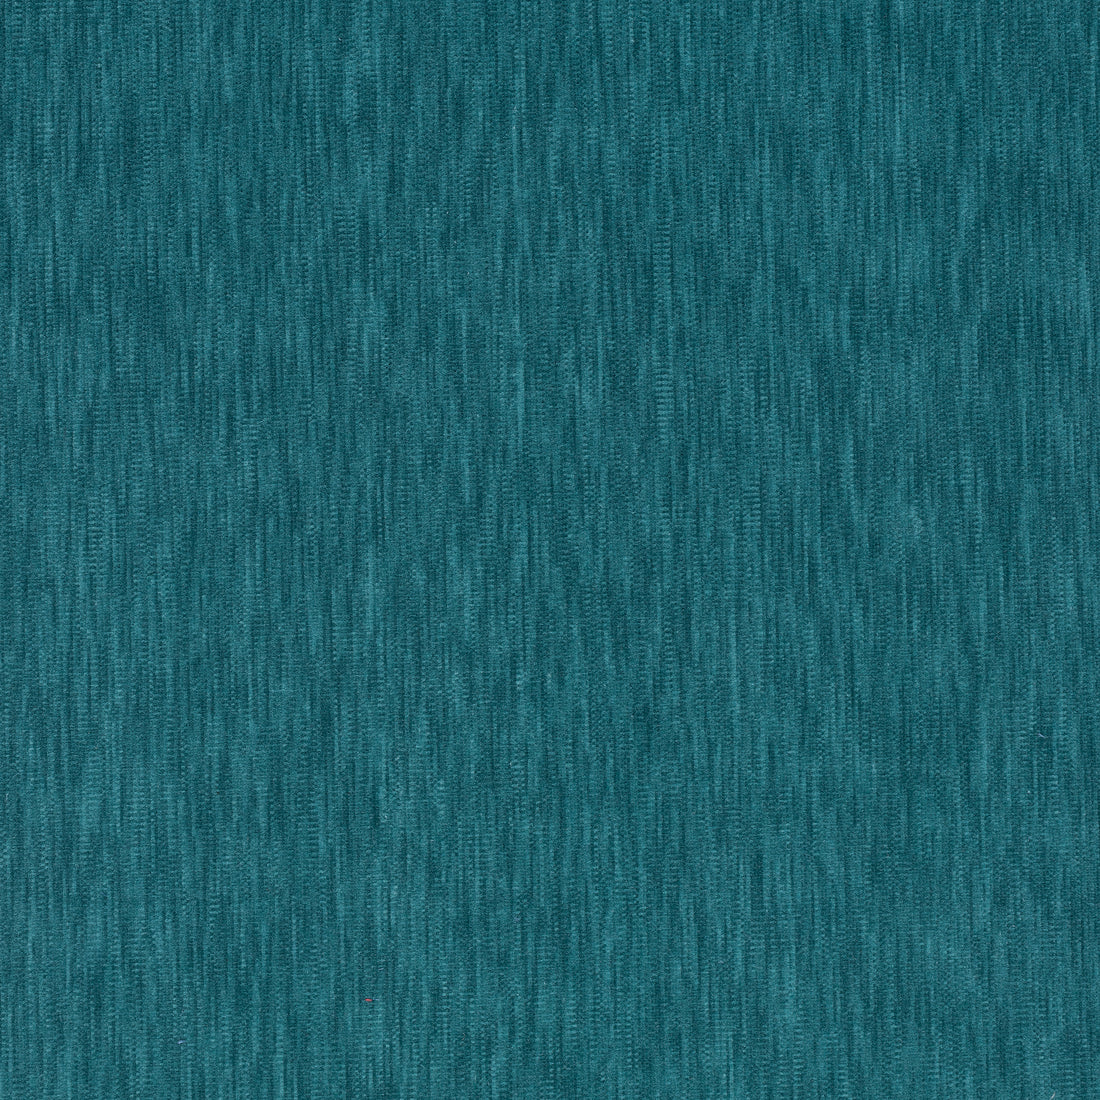 Riff Velvet fabric in teal color - pattern number W72833 - by Thibaut in the Woven Resource 13: Fusion Velvets collection